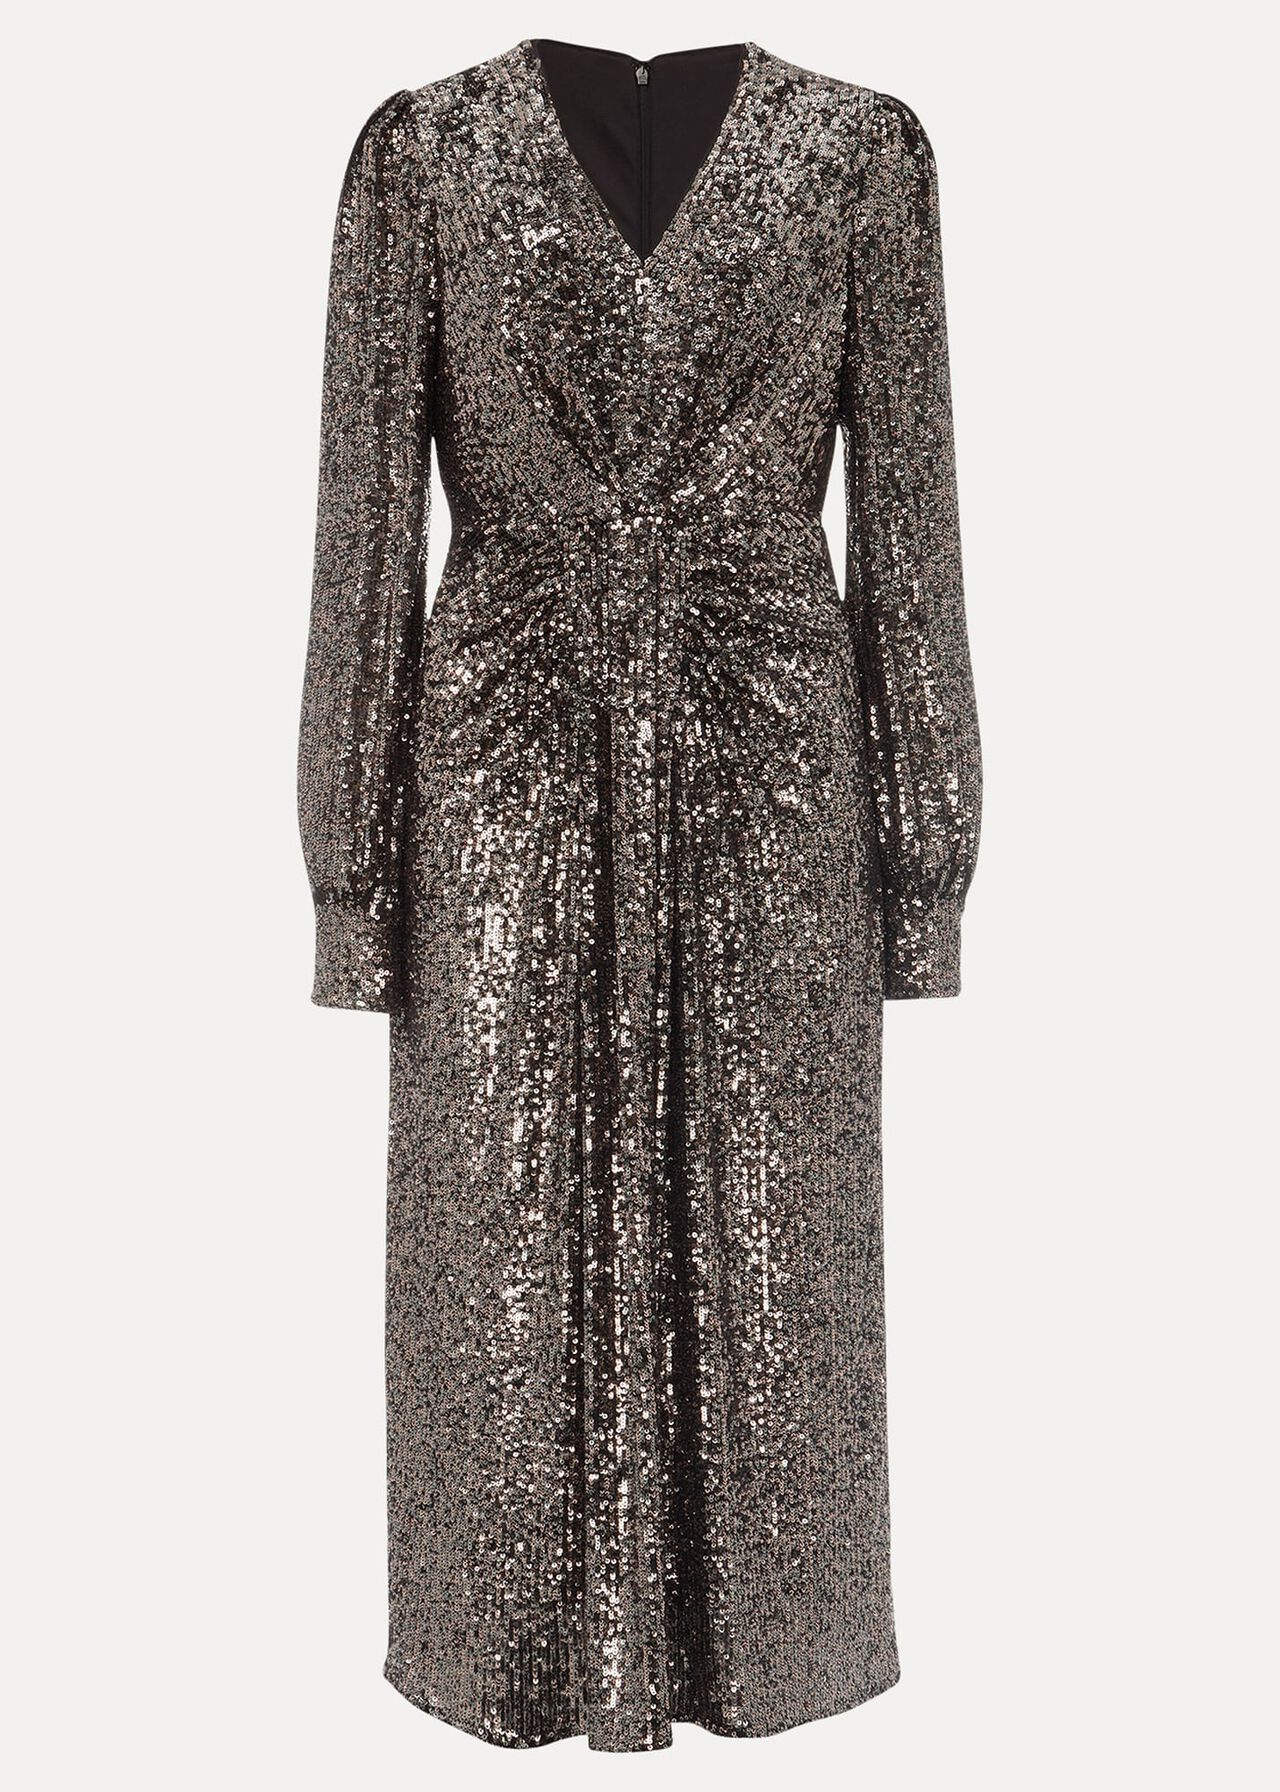 Haisley Sequin Sleeved Dress | Phase Eight